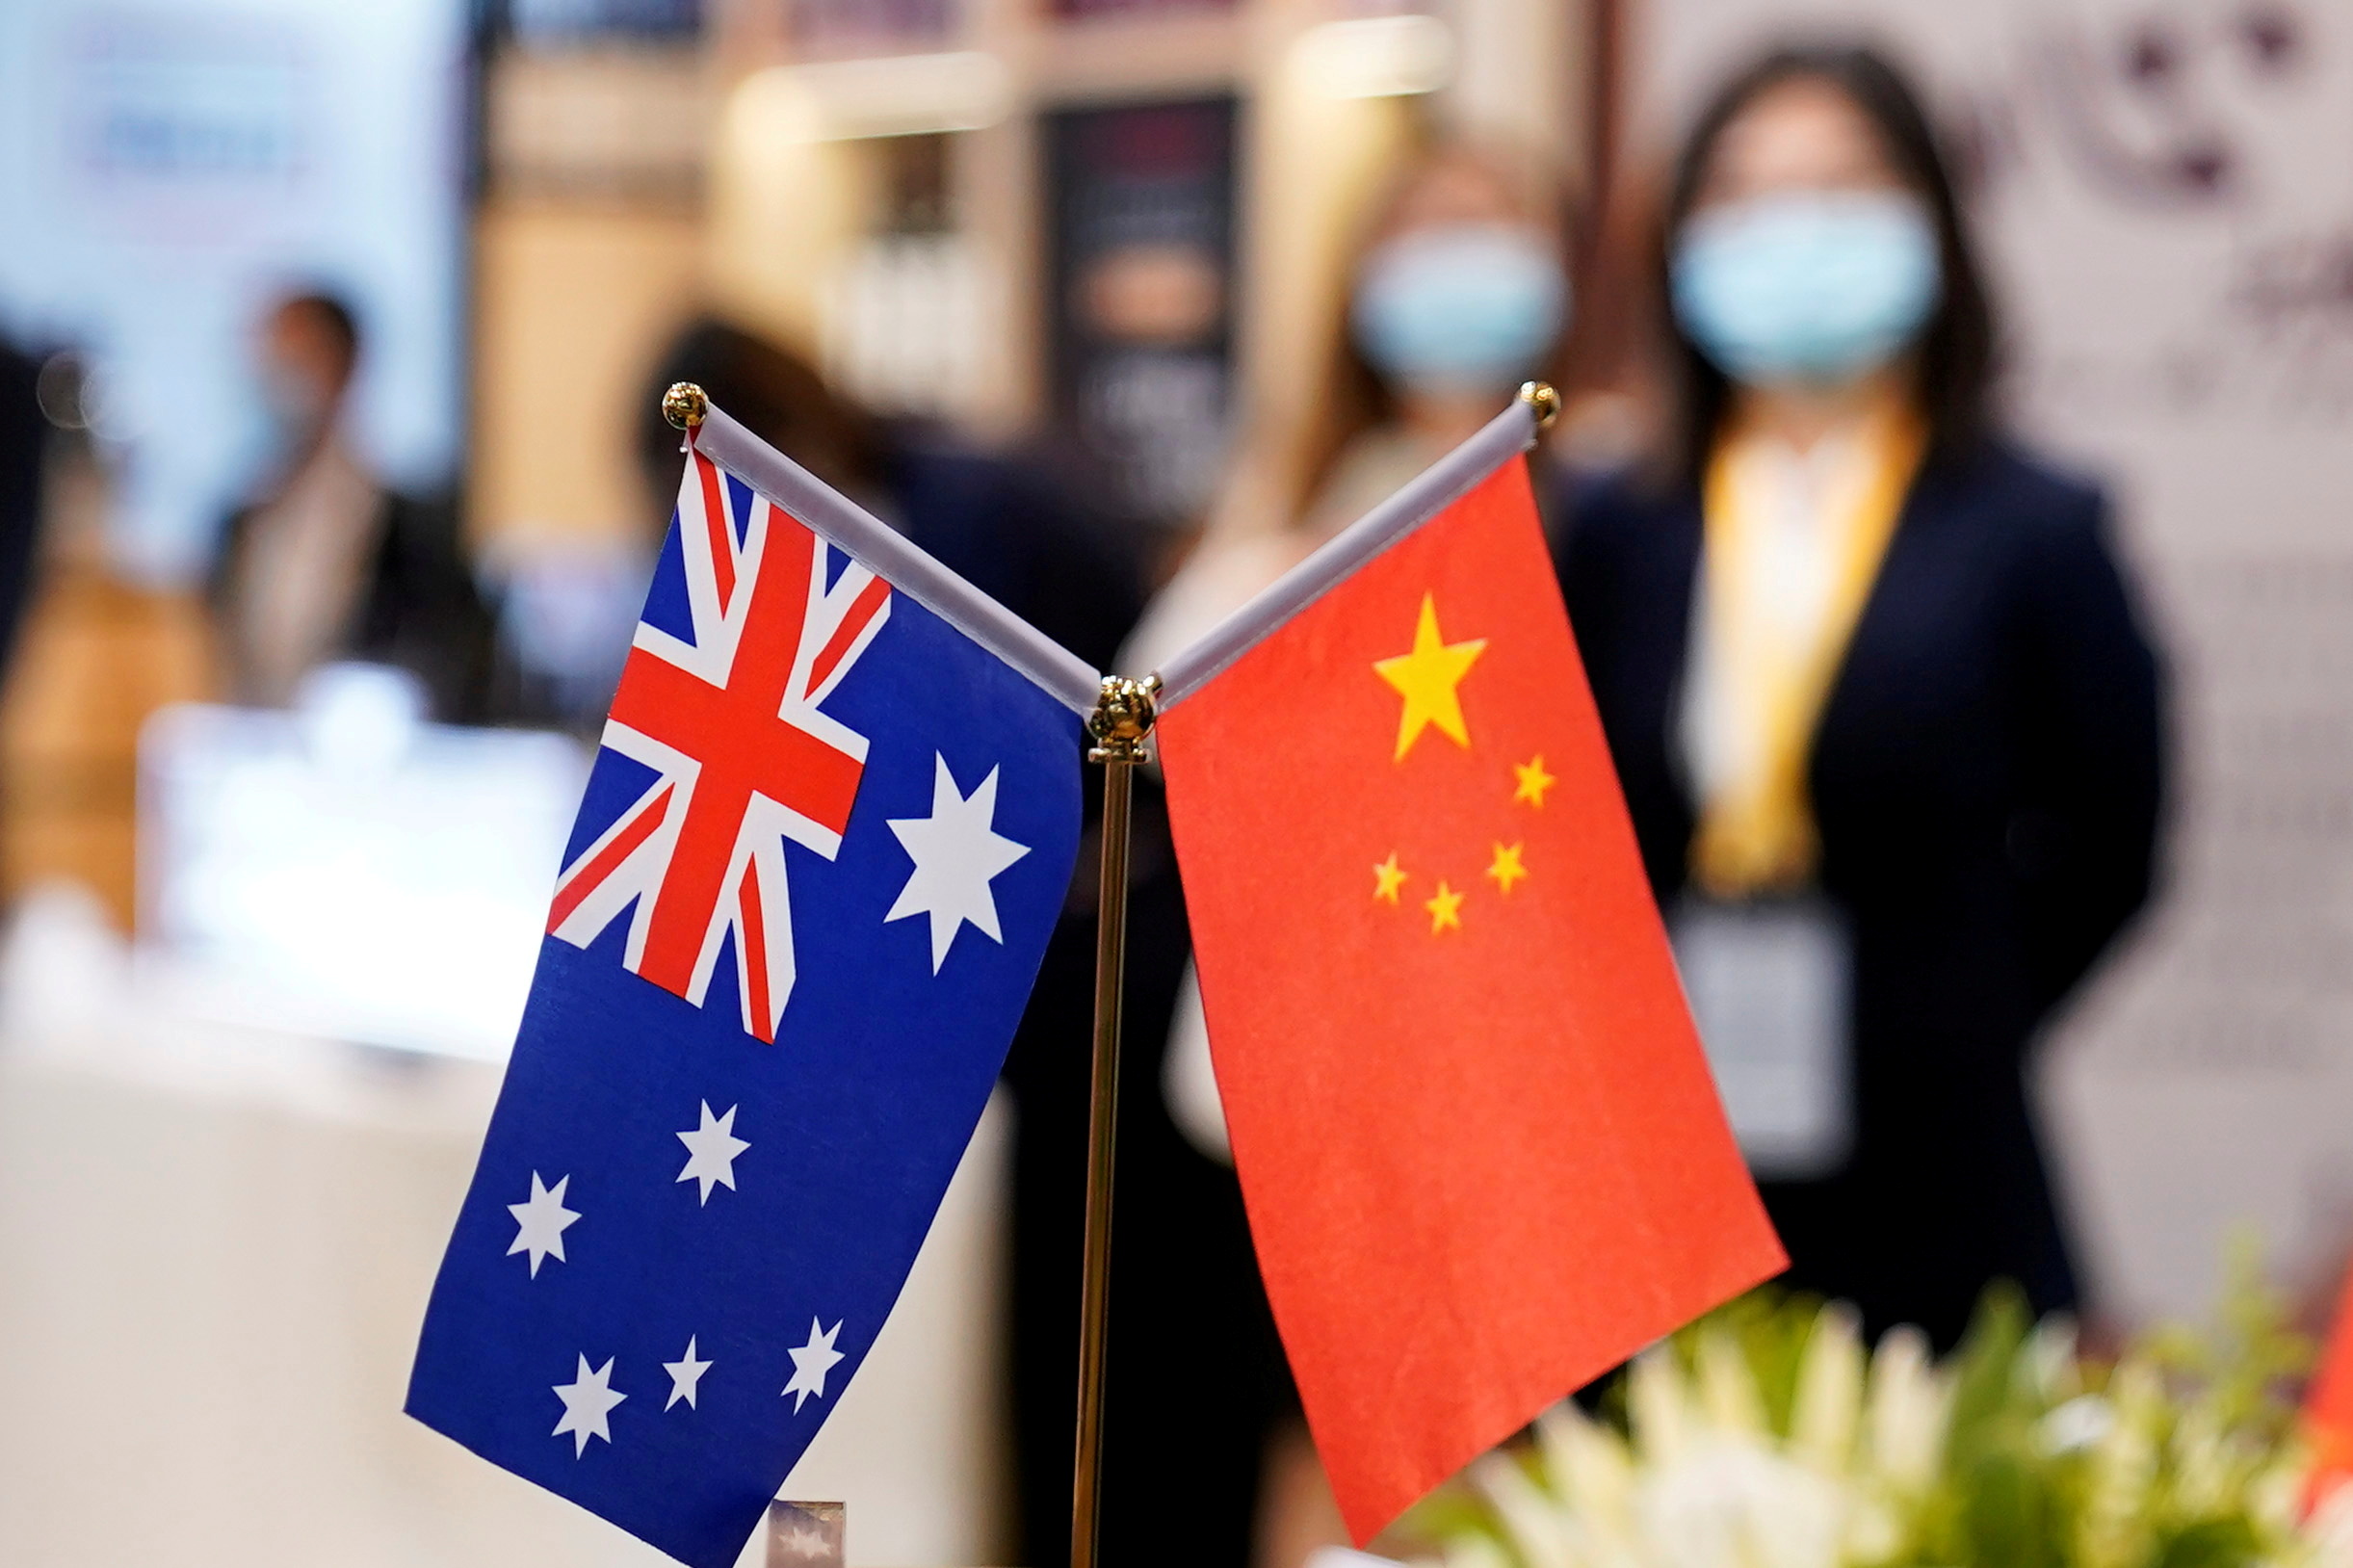 Australian and Chinese flags are seen at the third China International Import Expo (CIIE) in Shanghai